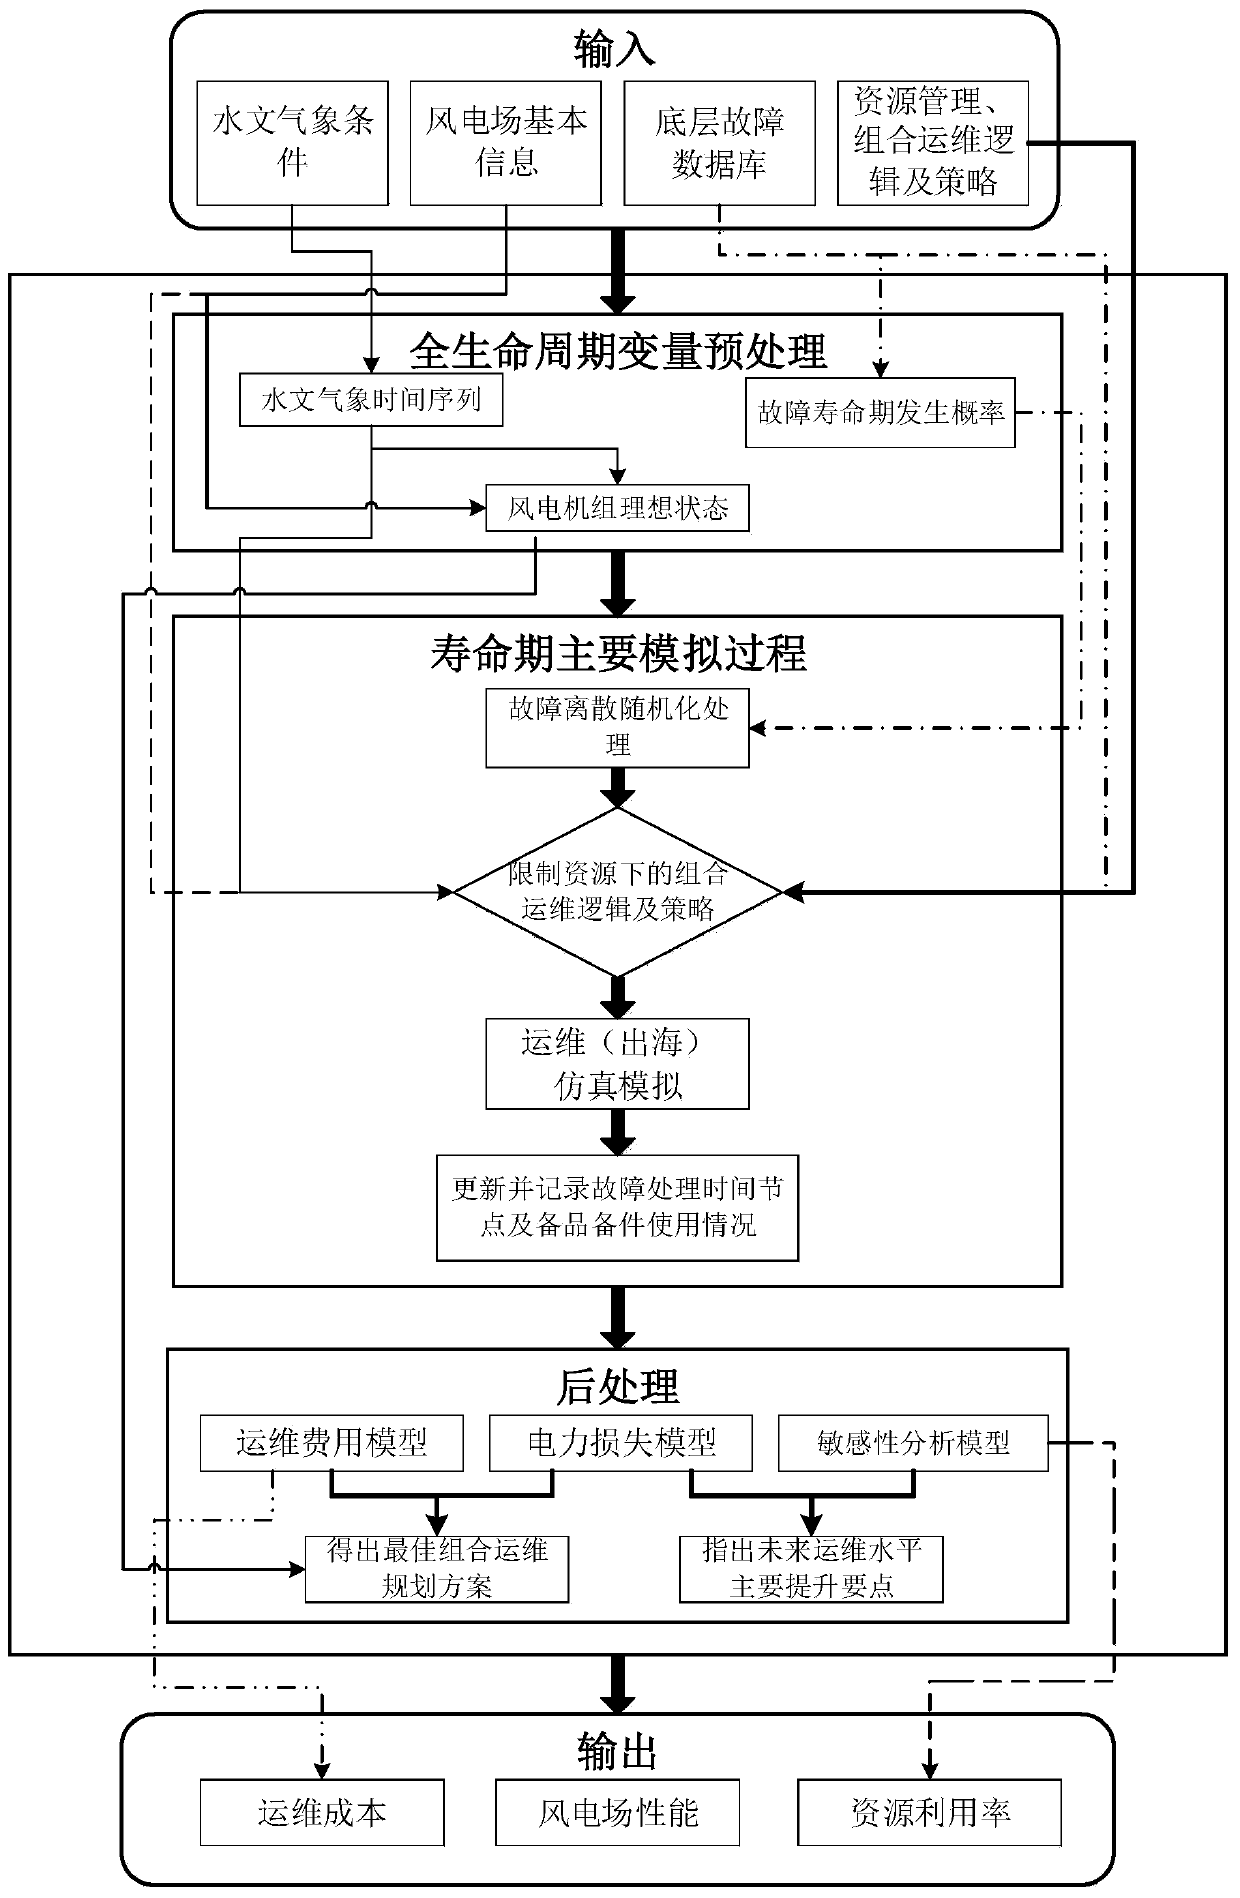 Method and system for offshore wind power operation and maintenance decision simulation